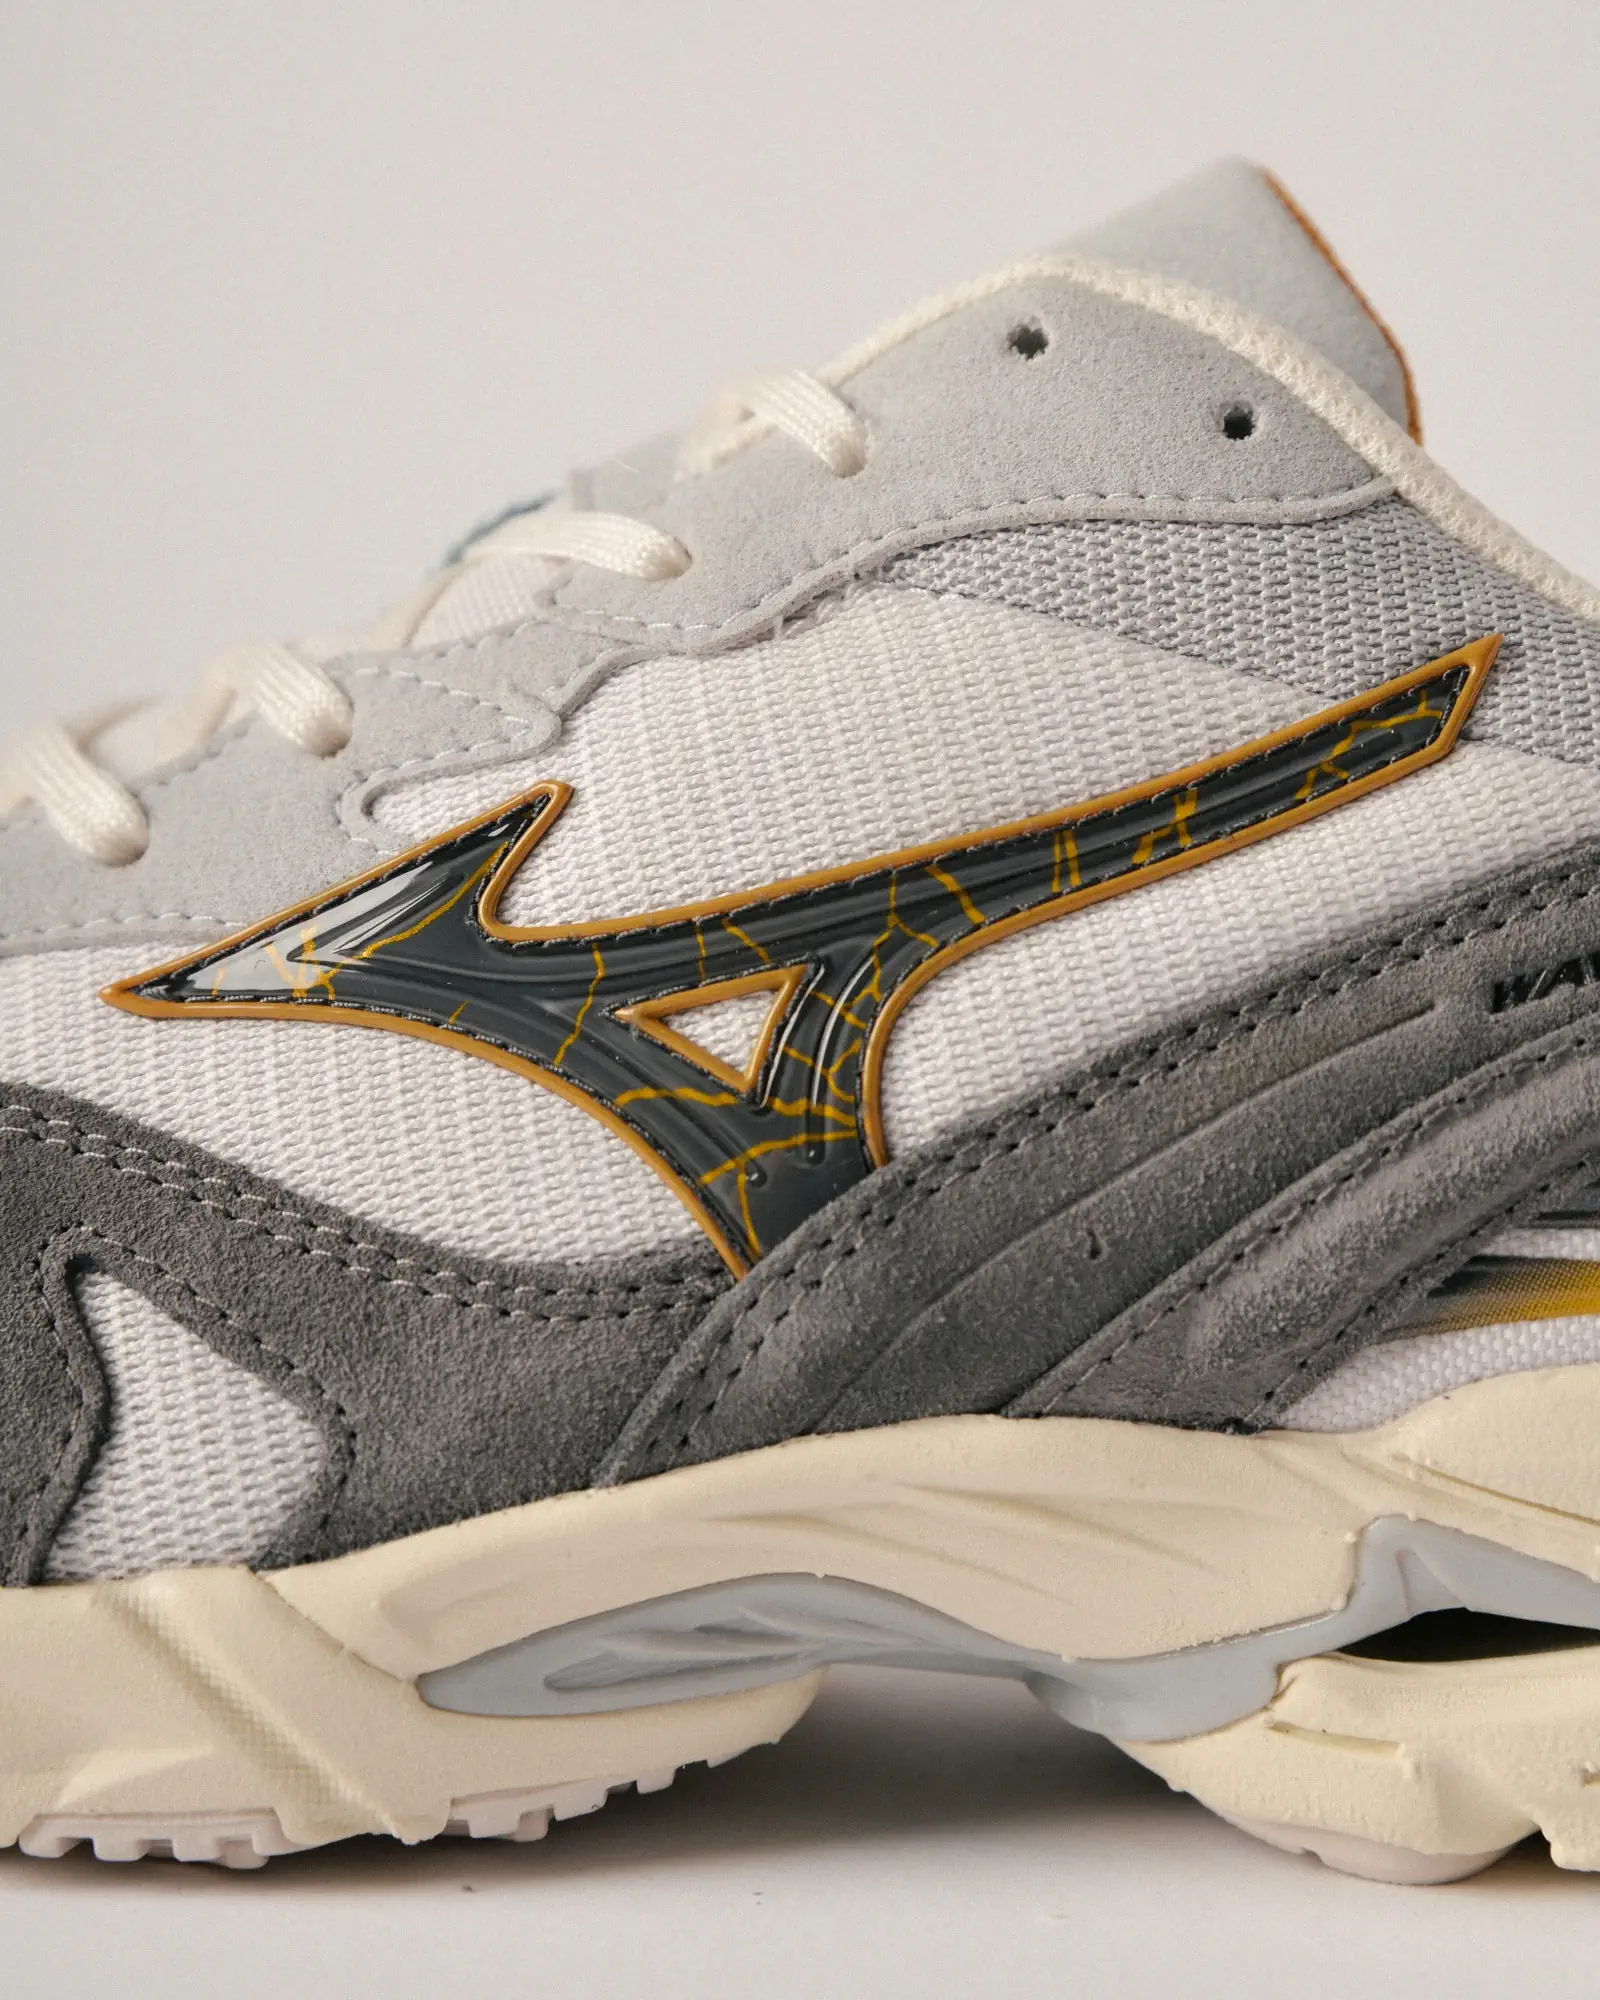 Mizuno Pack Kizuna: A Tribute to Tradition and Aesthetic Perfection in Footwear